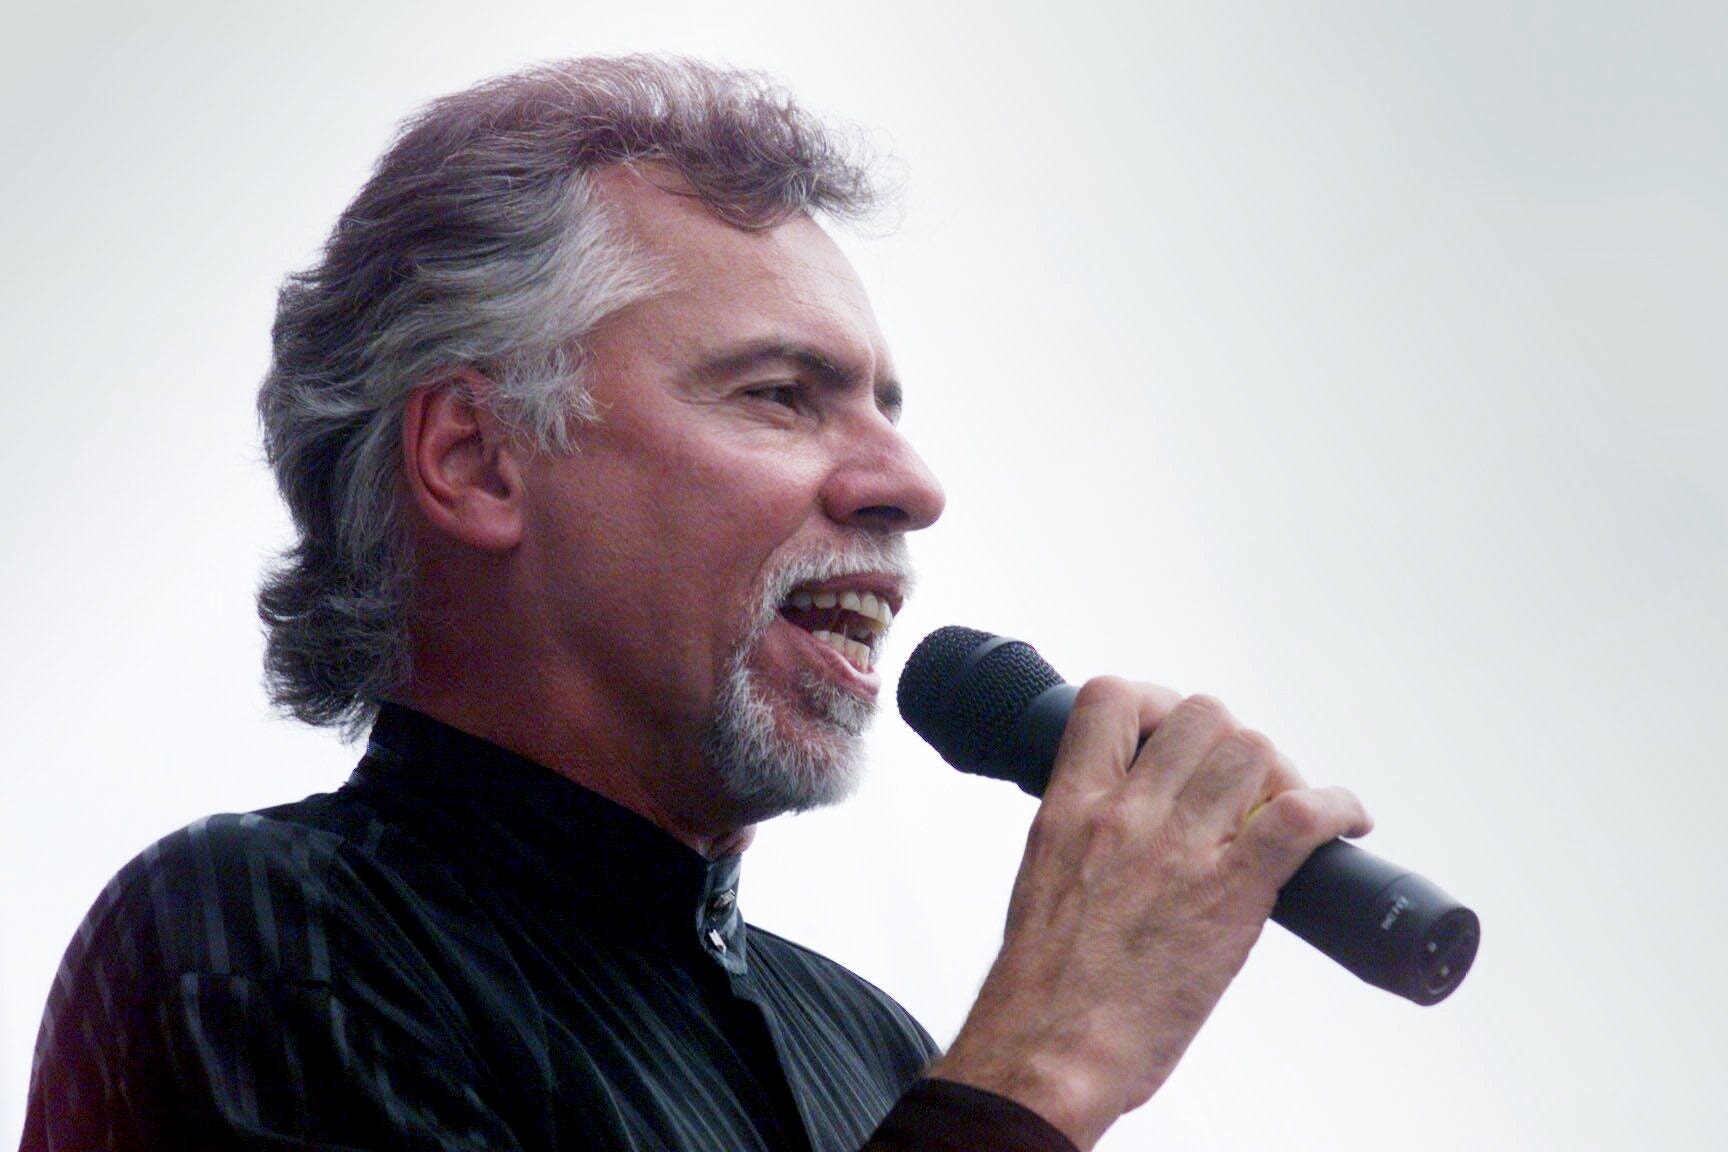 Oak Ridge Boys mourn death of Joe Bonsall. What to know about the 50-year member of the long-running vocal group.